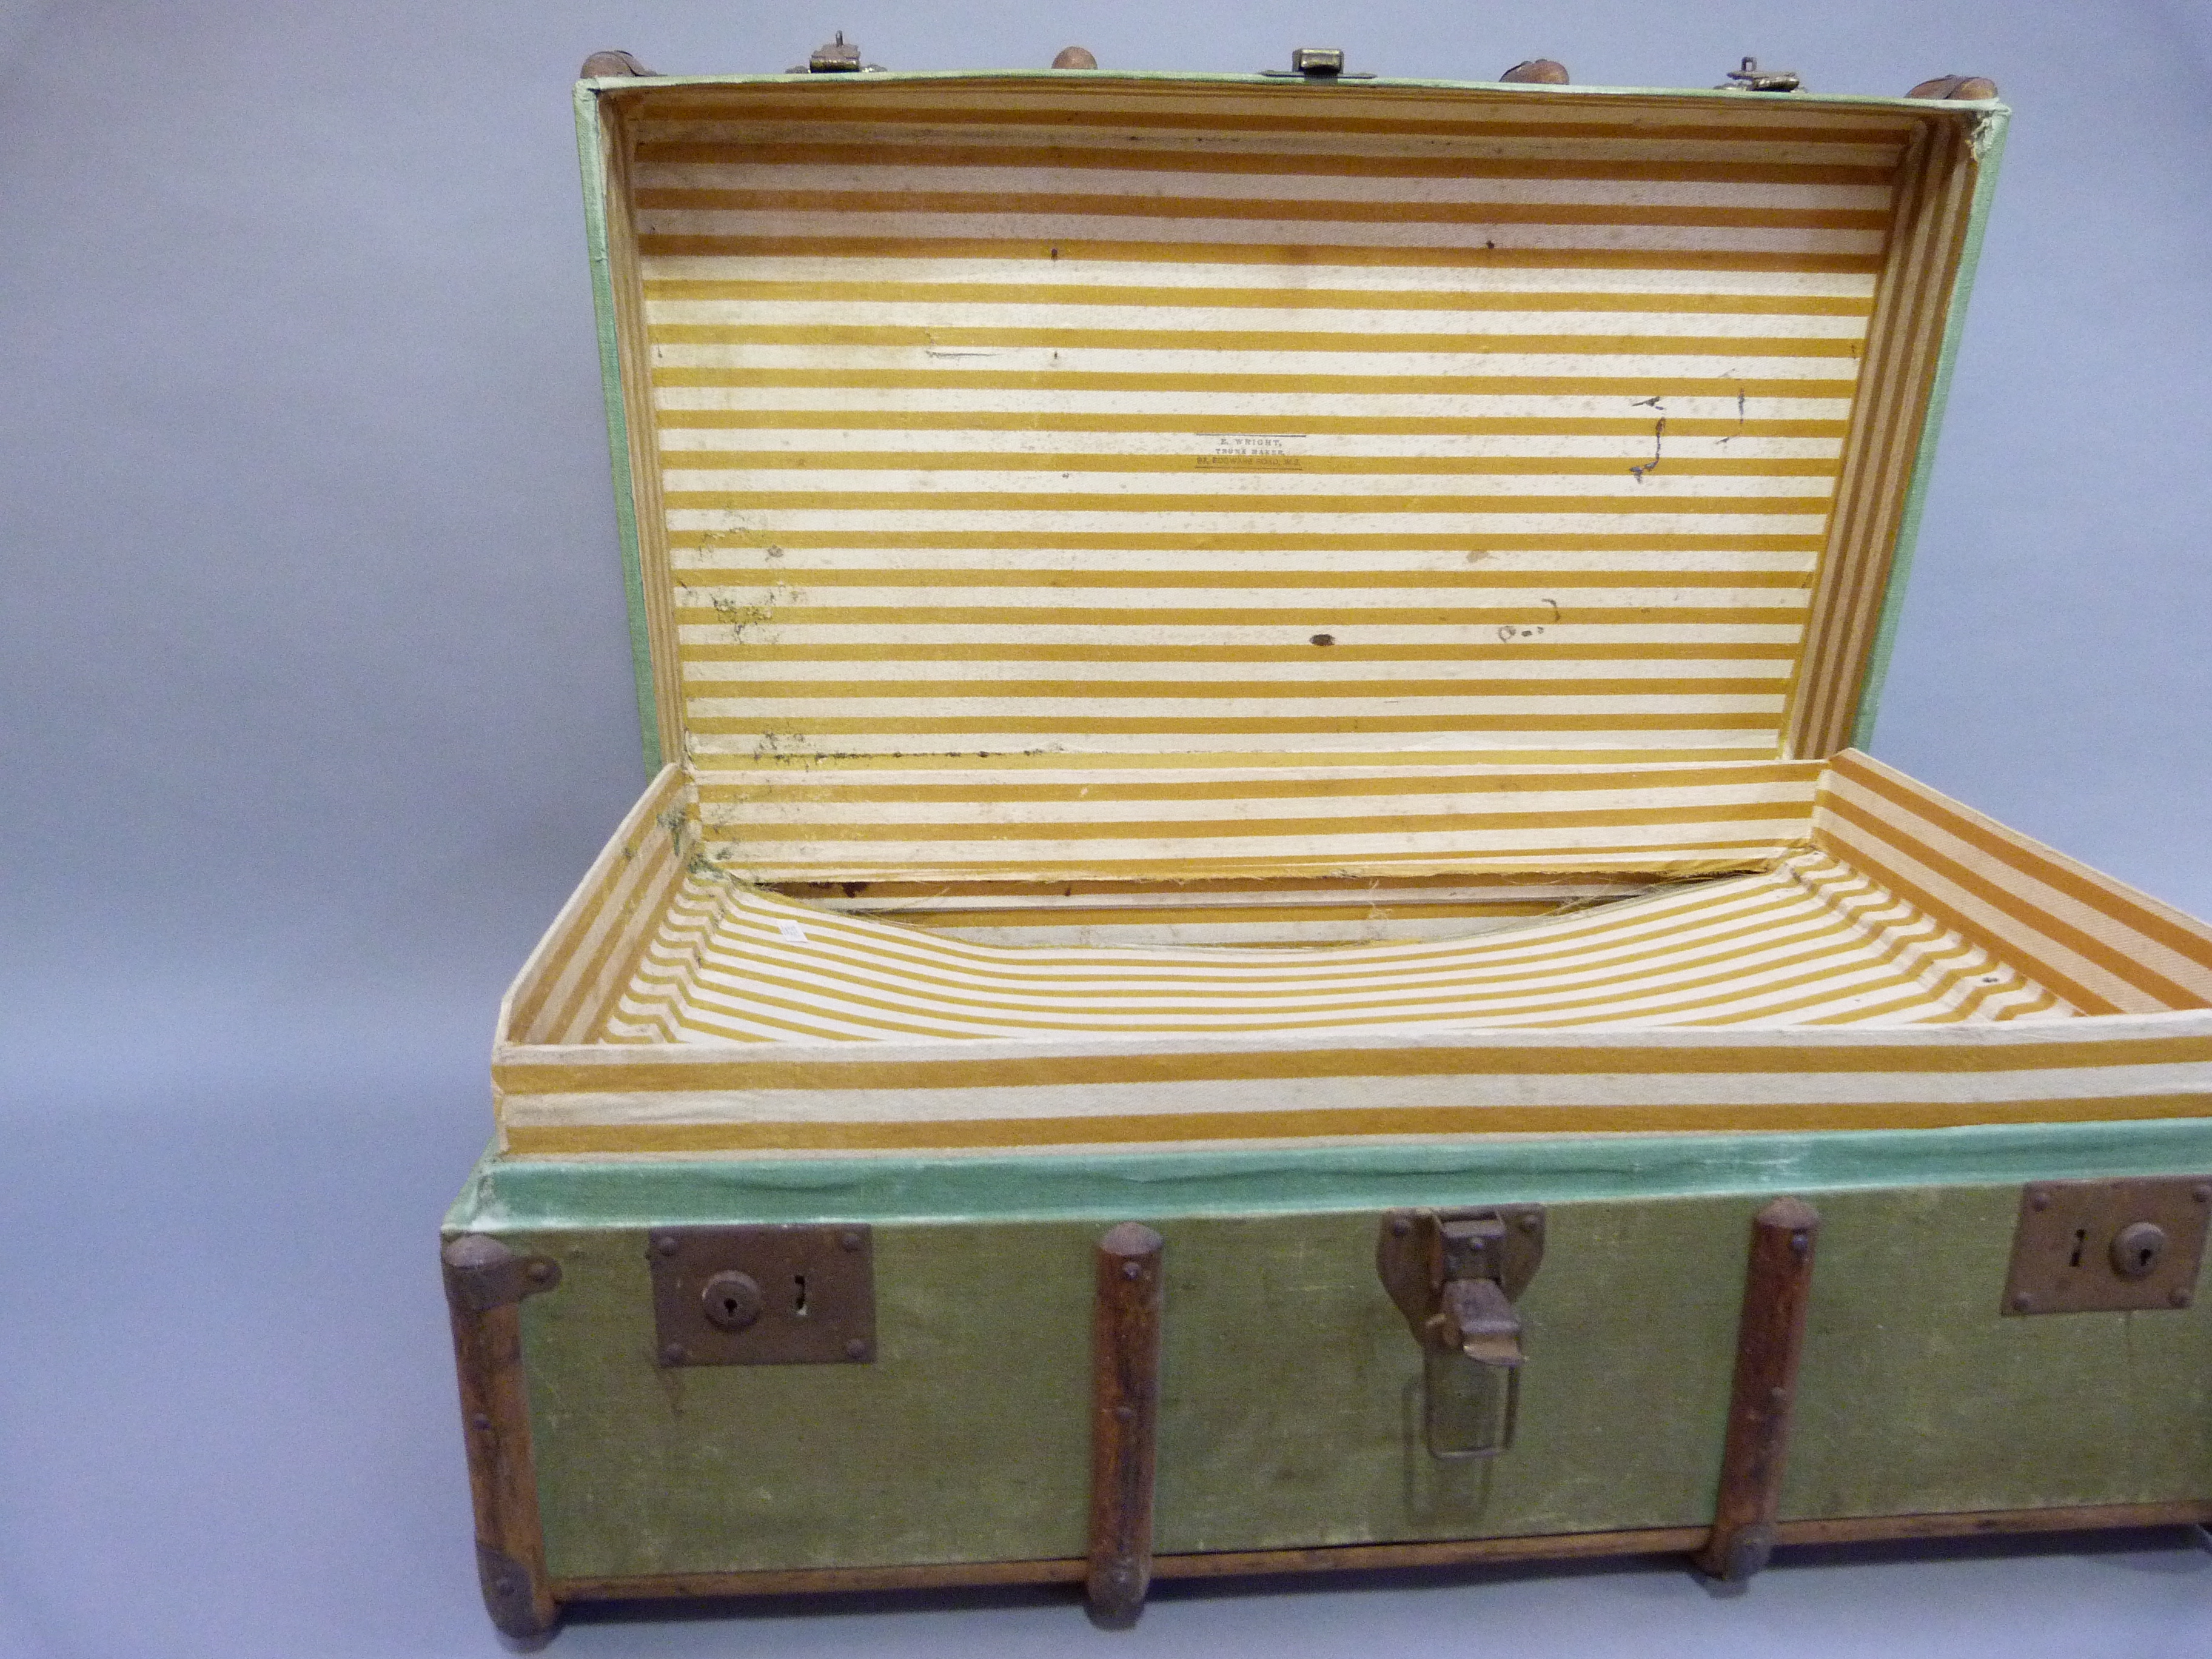 A canvas trunk with wood ribbing with luggage labels 'Luggage in Advance' 85cm wide x 52cm deep x - Image 3 of 4